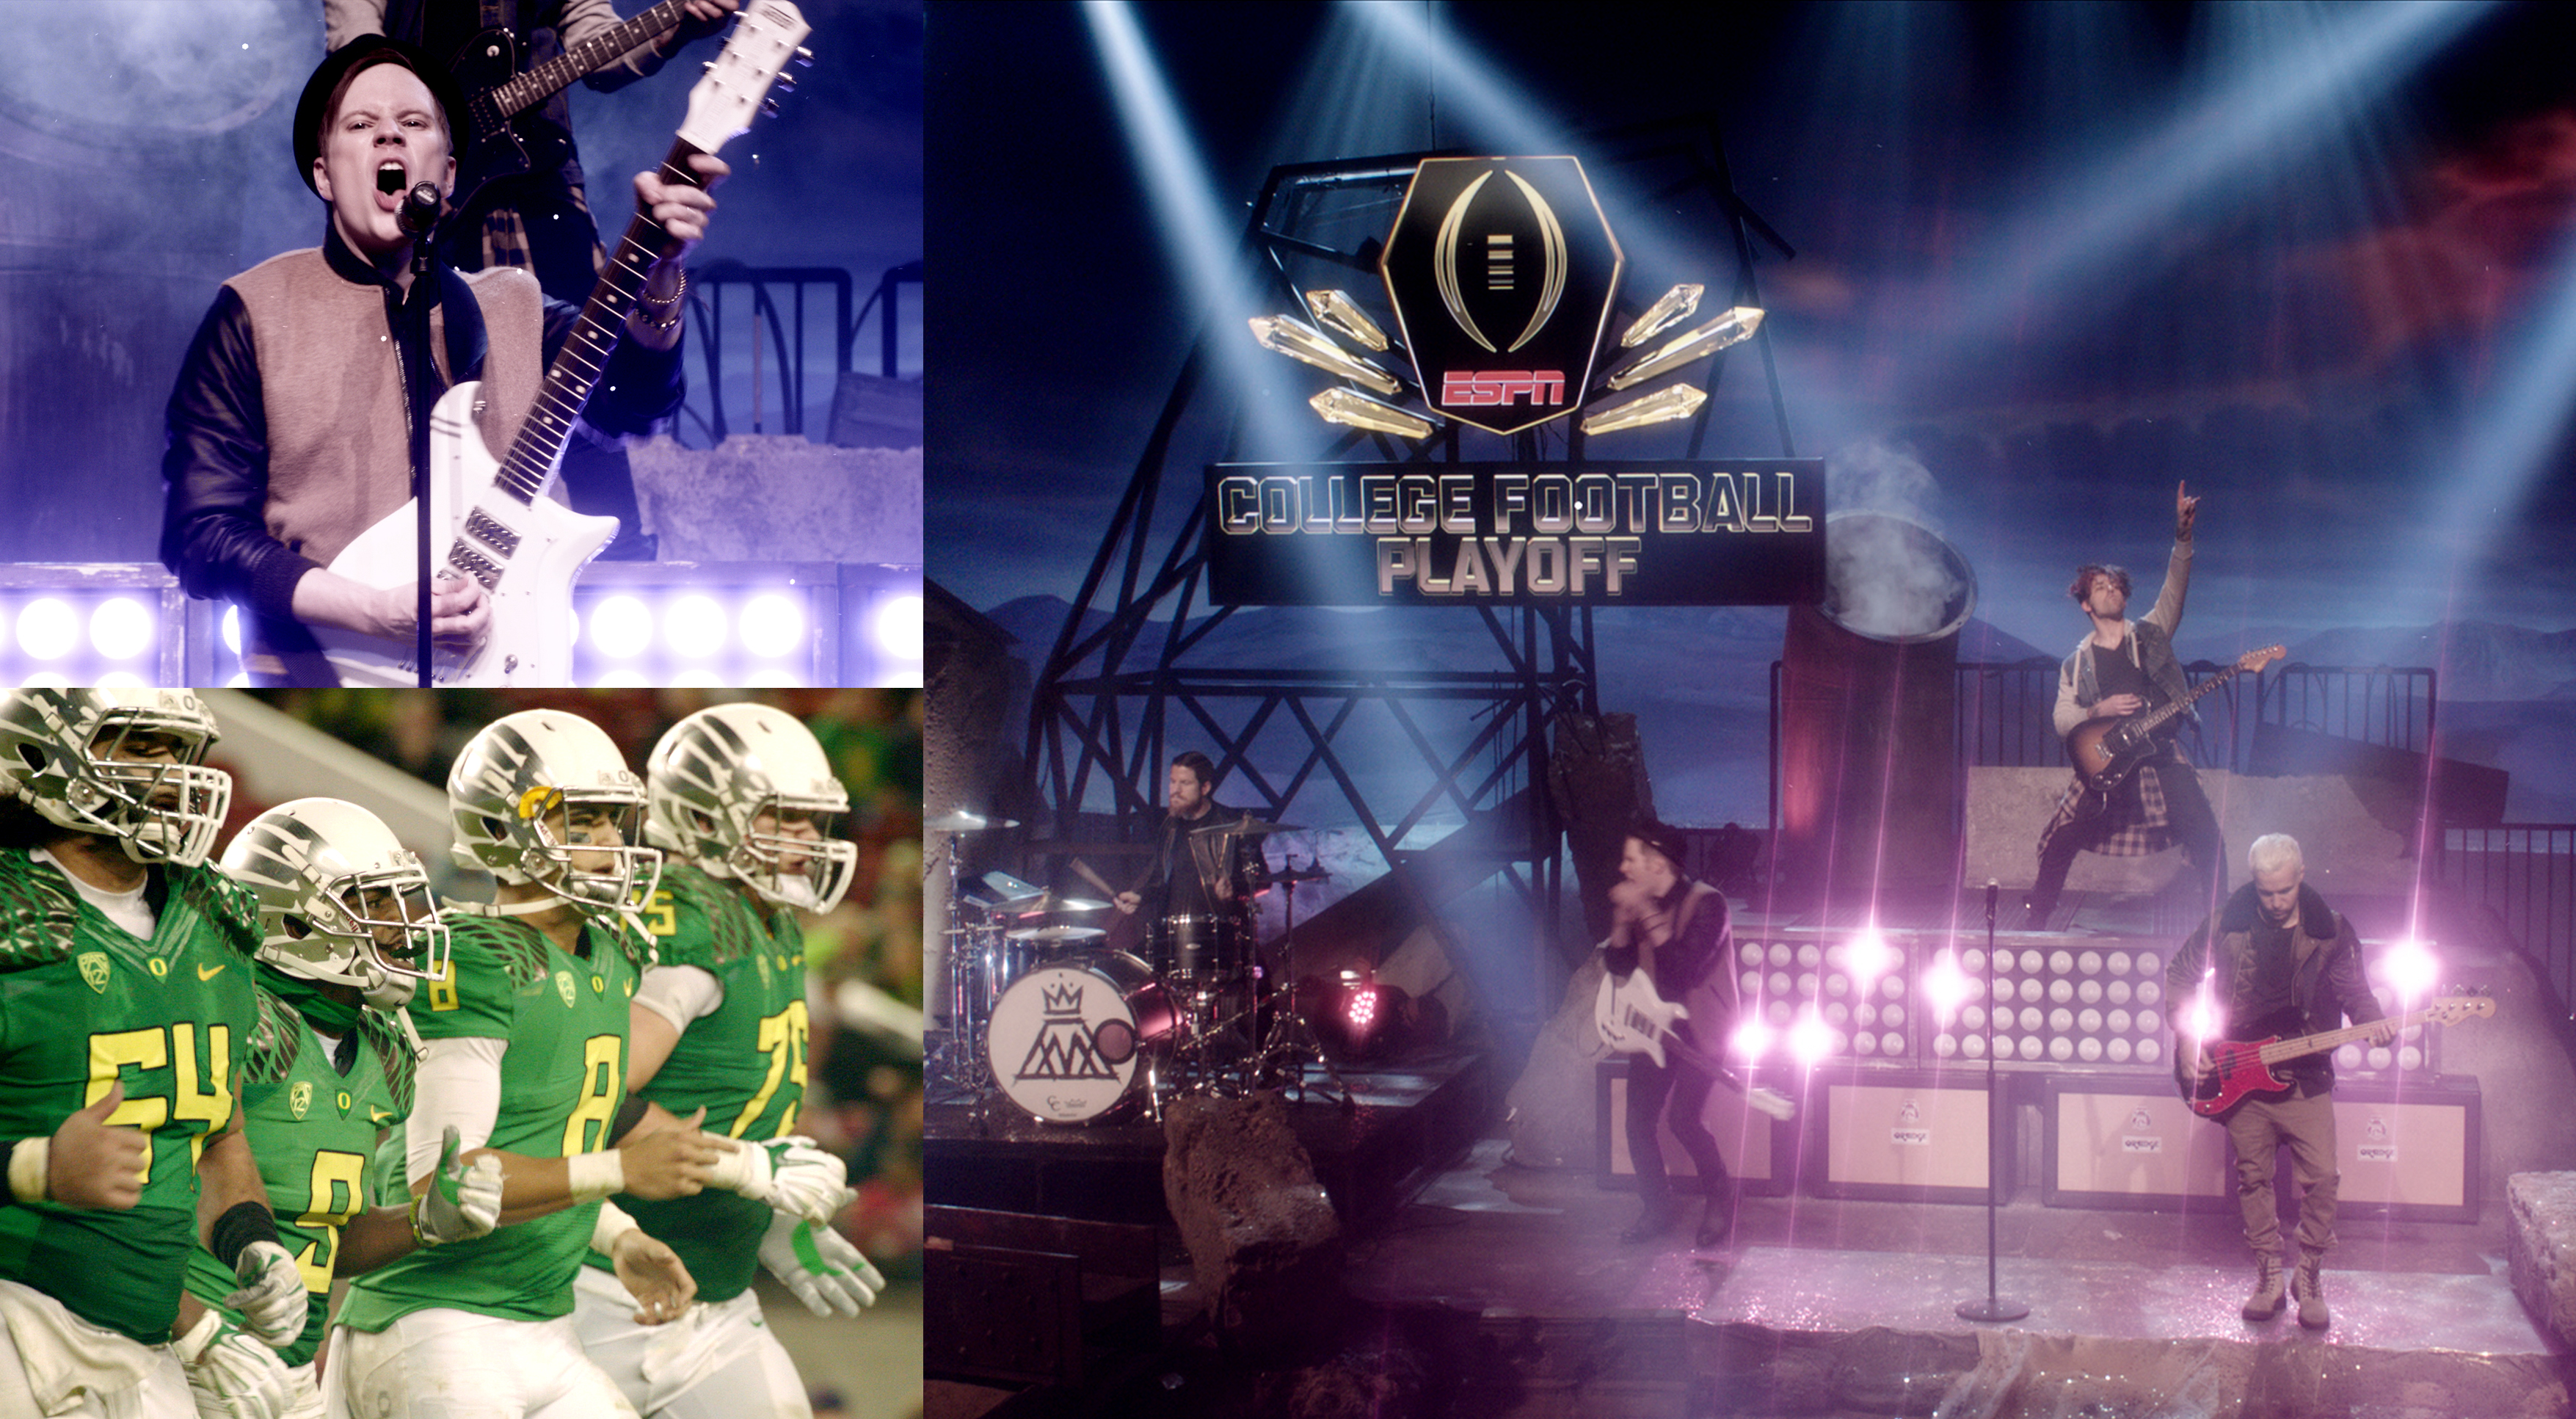 College Football Playoffs with Fall Out Boy by Bellaluca